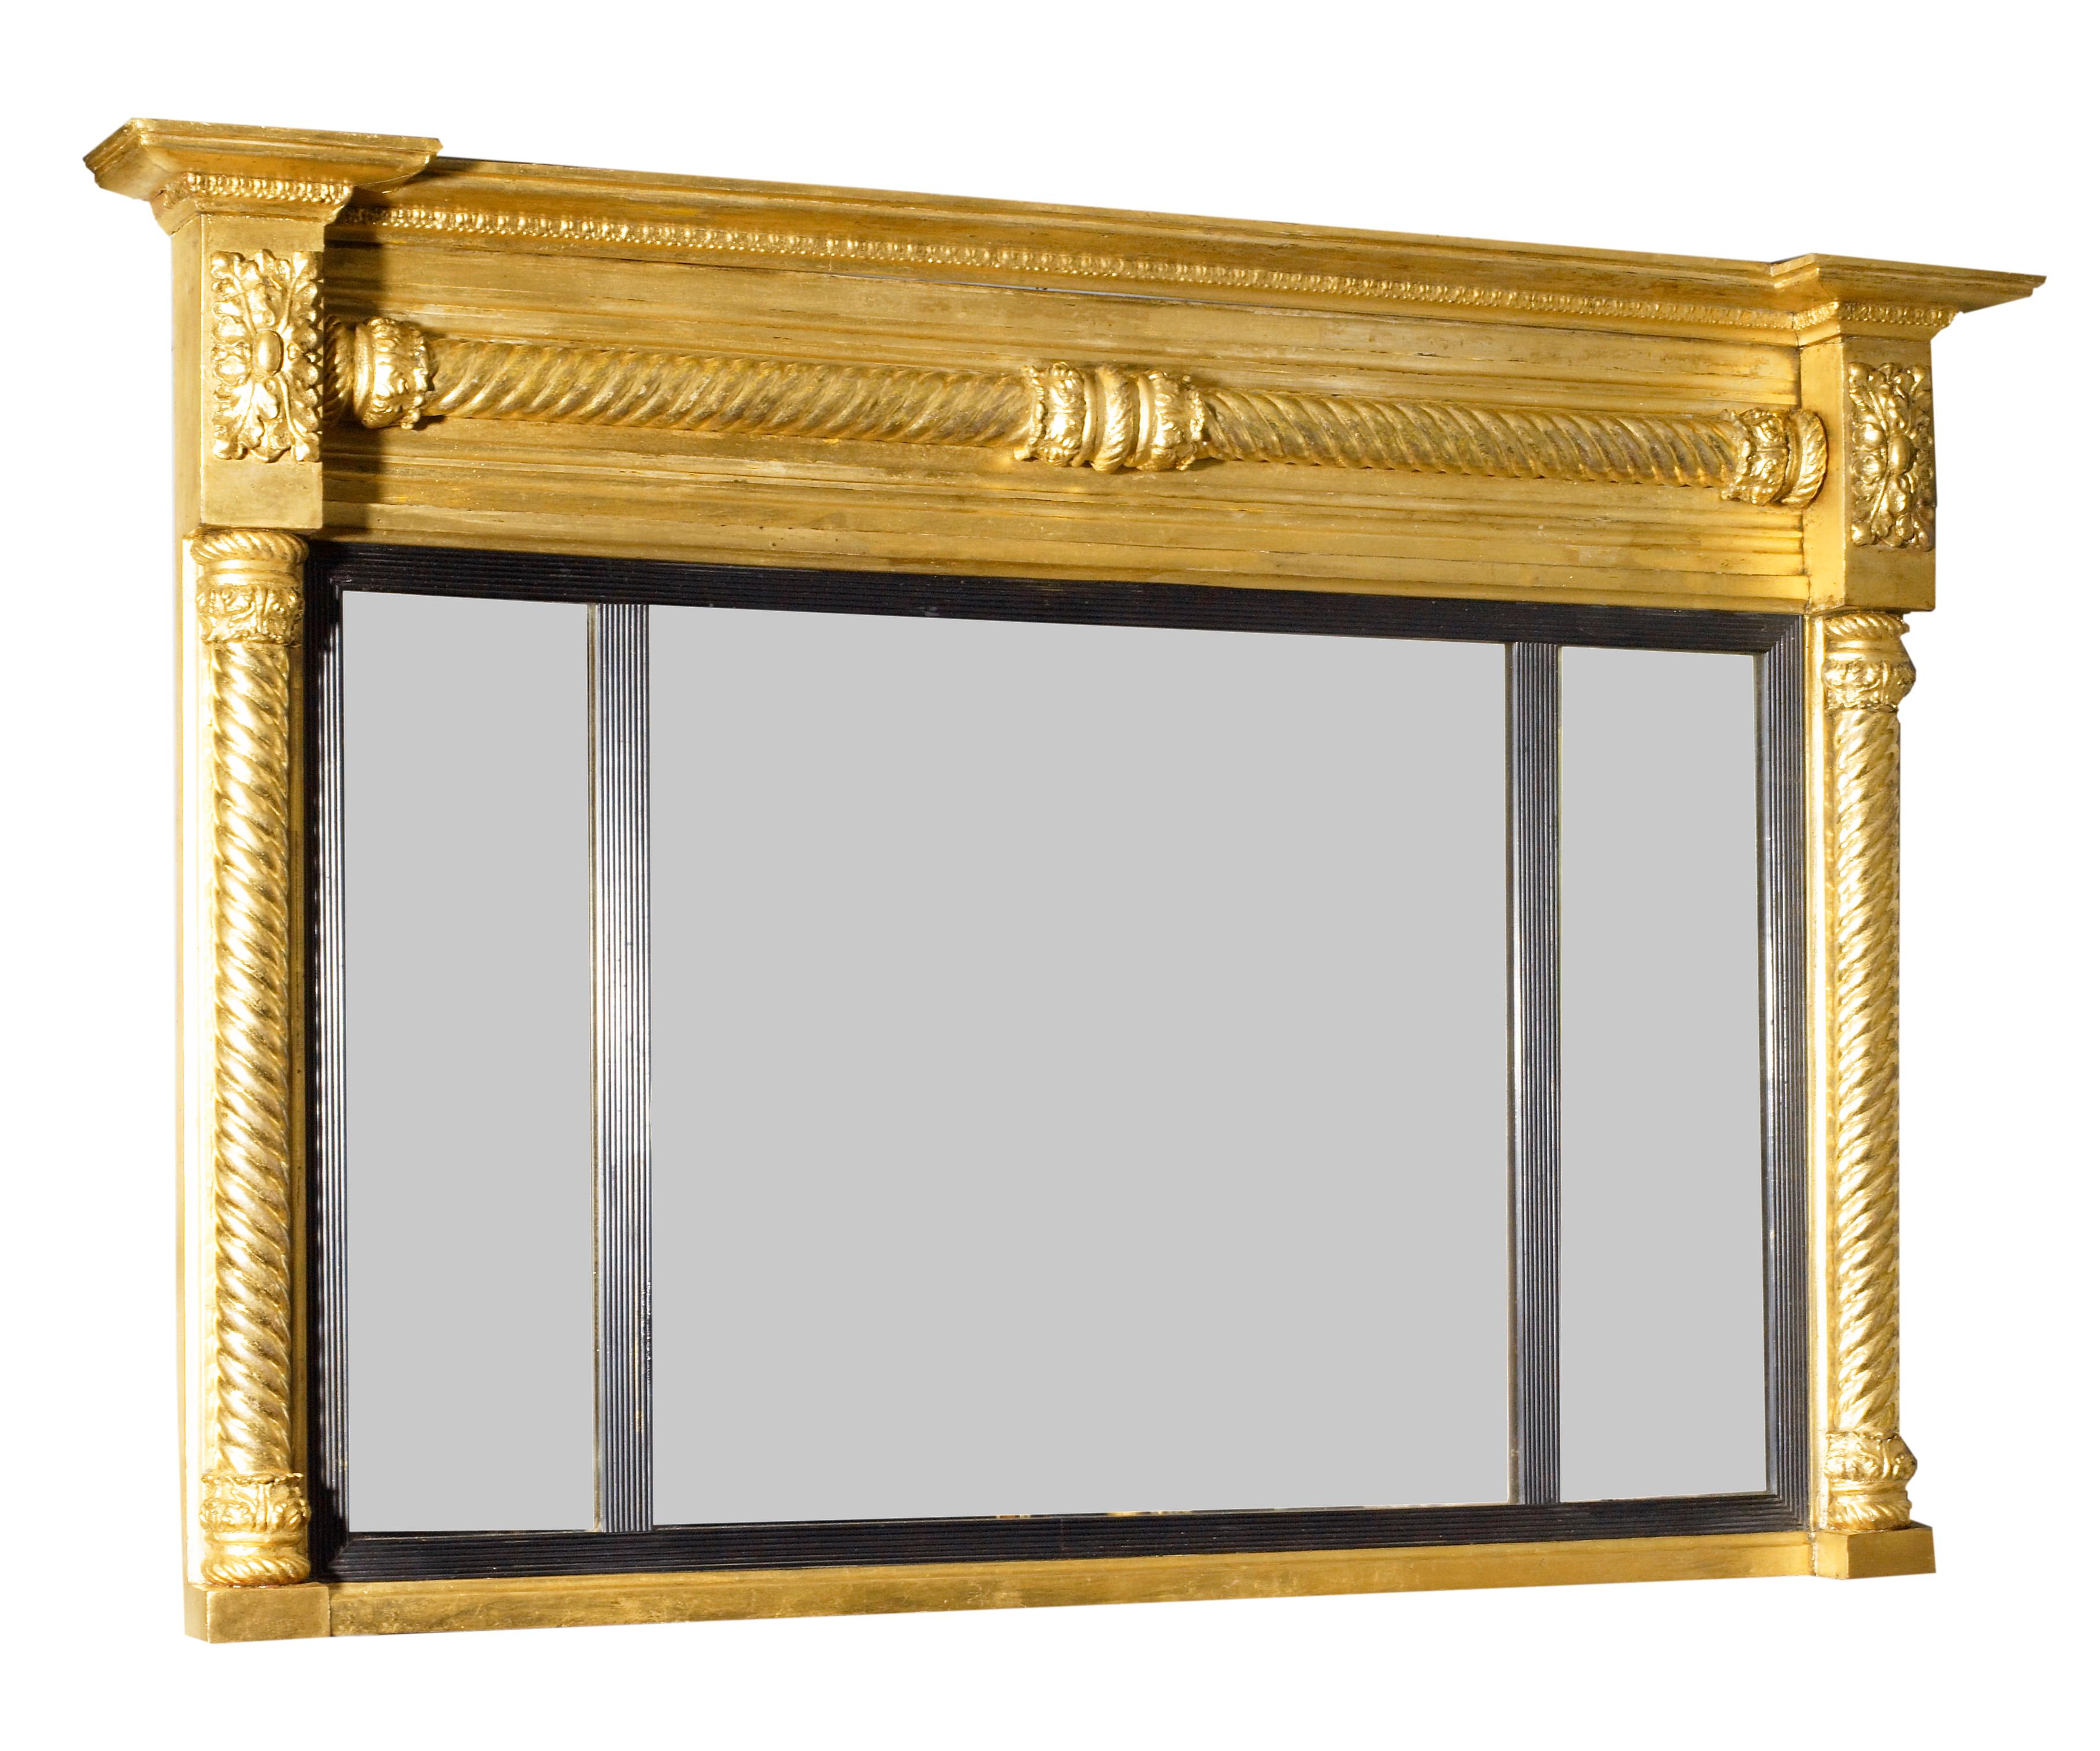 19th century three compartmental overmantle mirror. The mirror with three carved columns with detailed foliage design at the top edges.